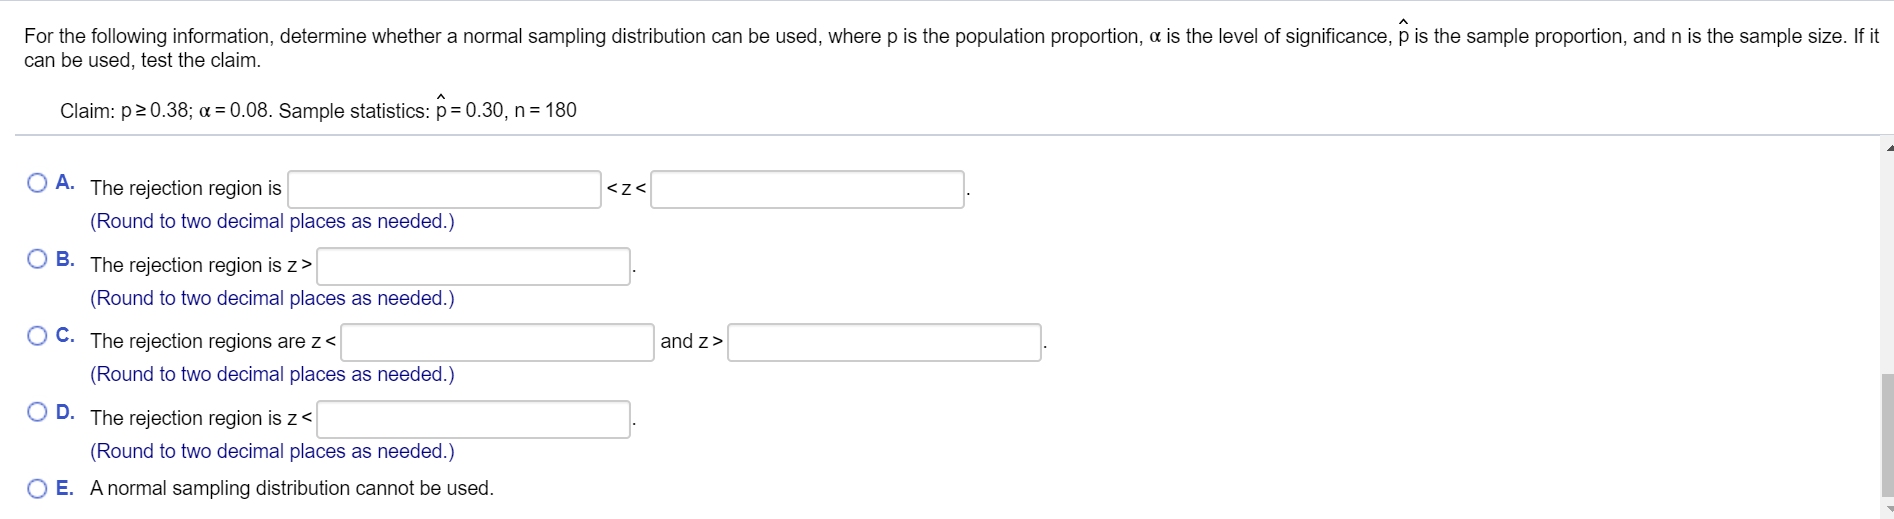 For the following information, determine whether a normal sampling distribution can be used, where p is the population proportion, a is the level of significance, p is the sample proportion, and n is the sample size. If it
can be used, test the claim.
Claim: p> 0.38; a = 0.08. Sample statistics: p = 0.30, n = 180
